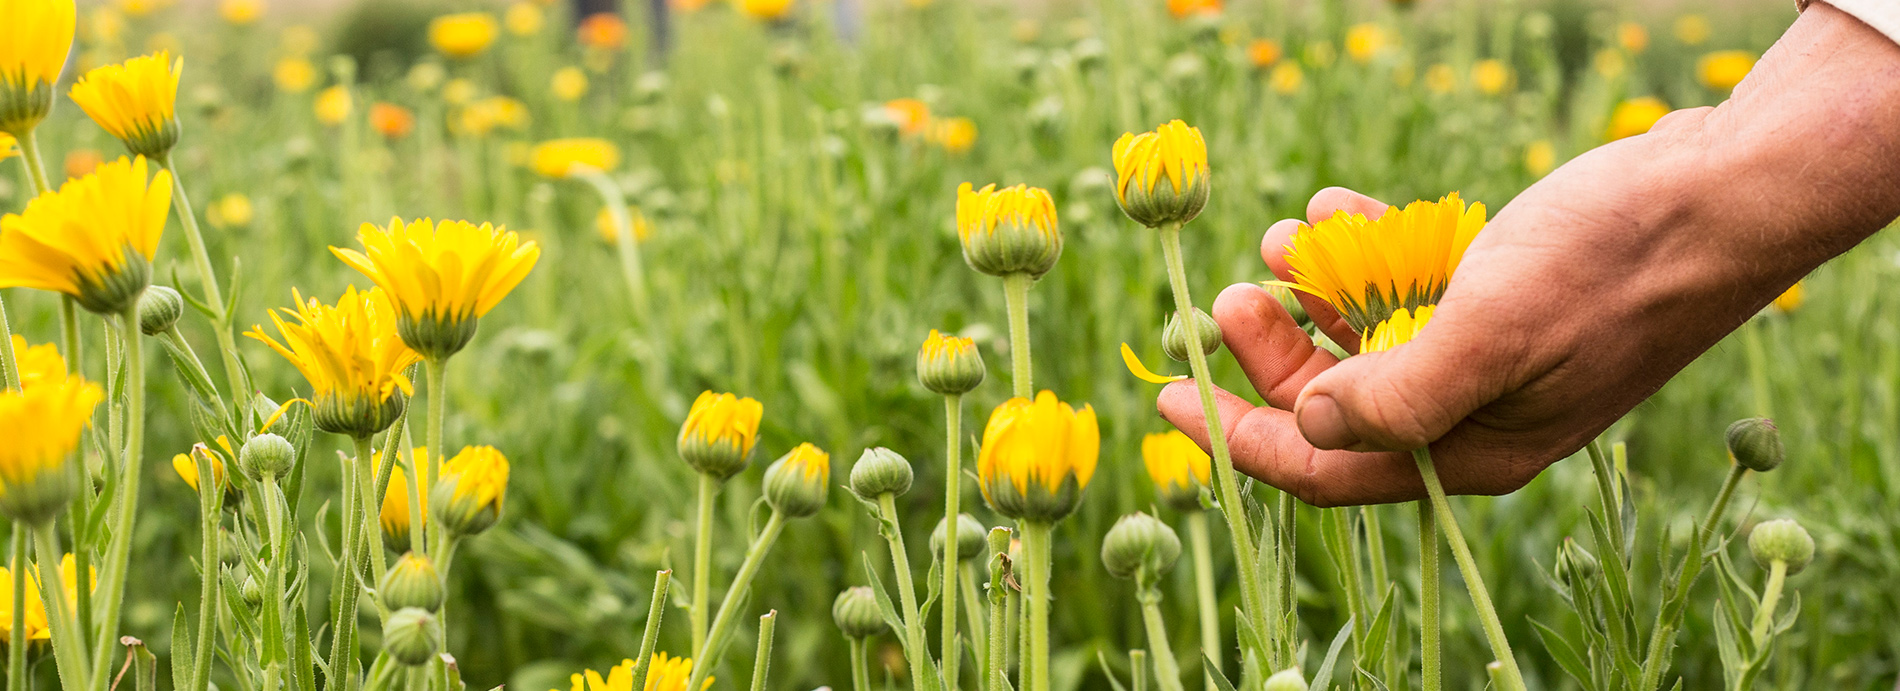 Calendula being harvested by hand